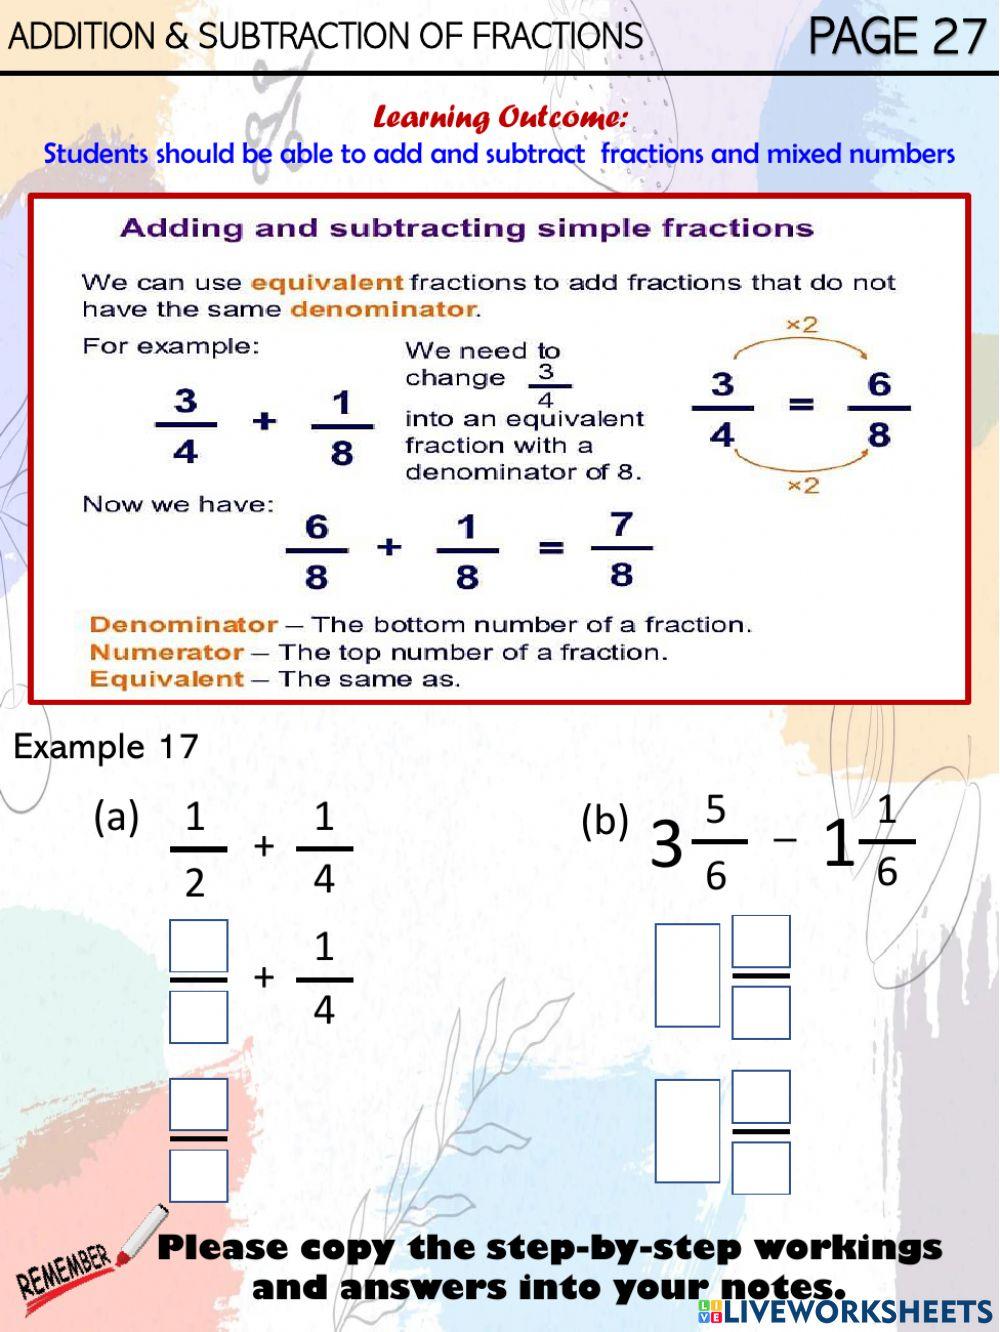 Addition and subtraction of fractions